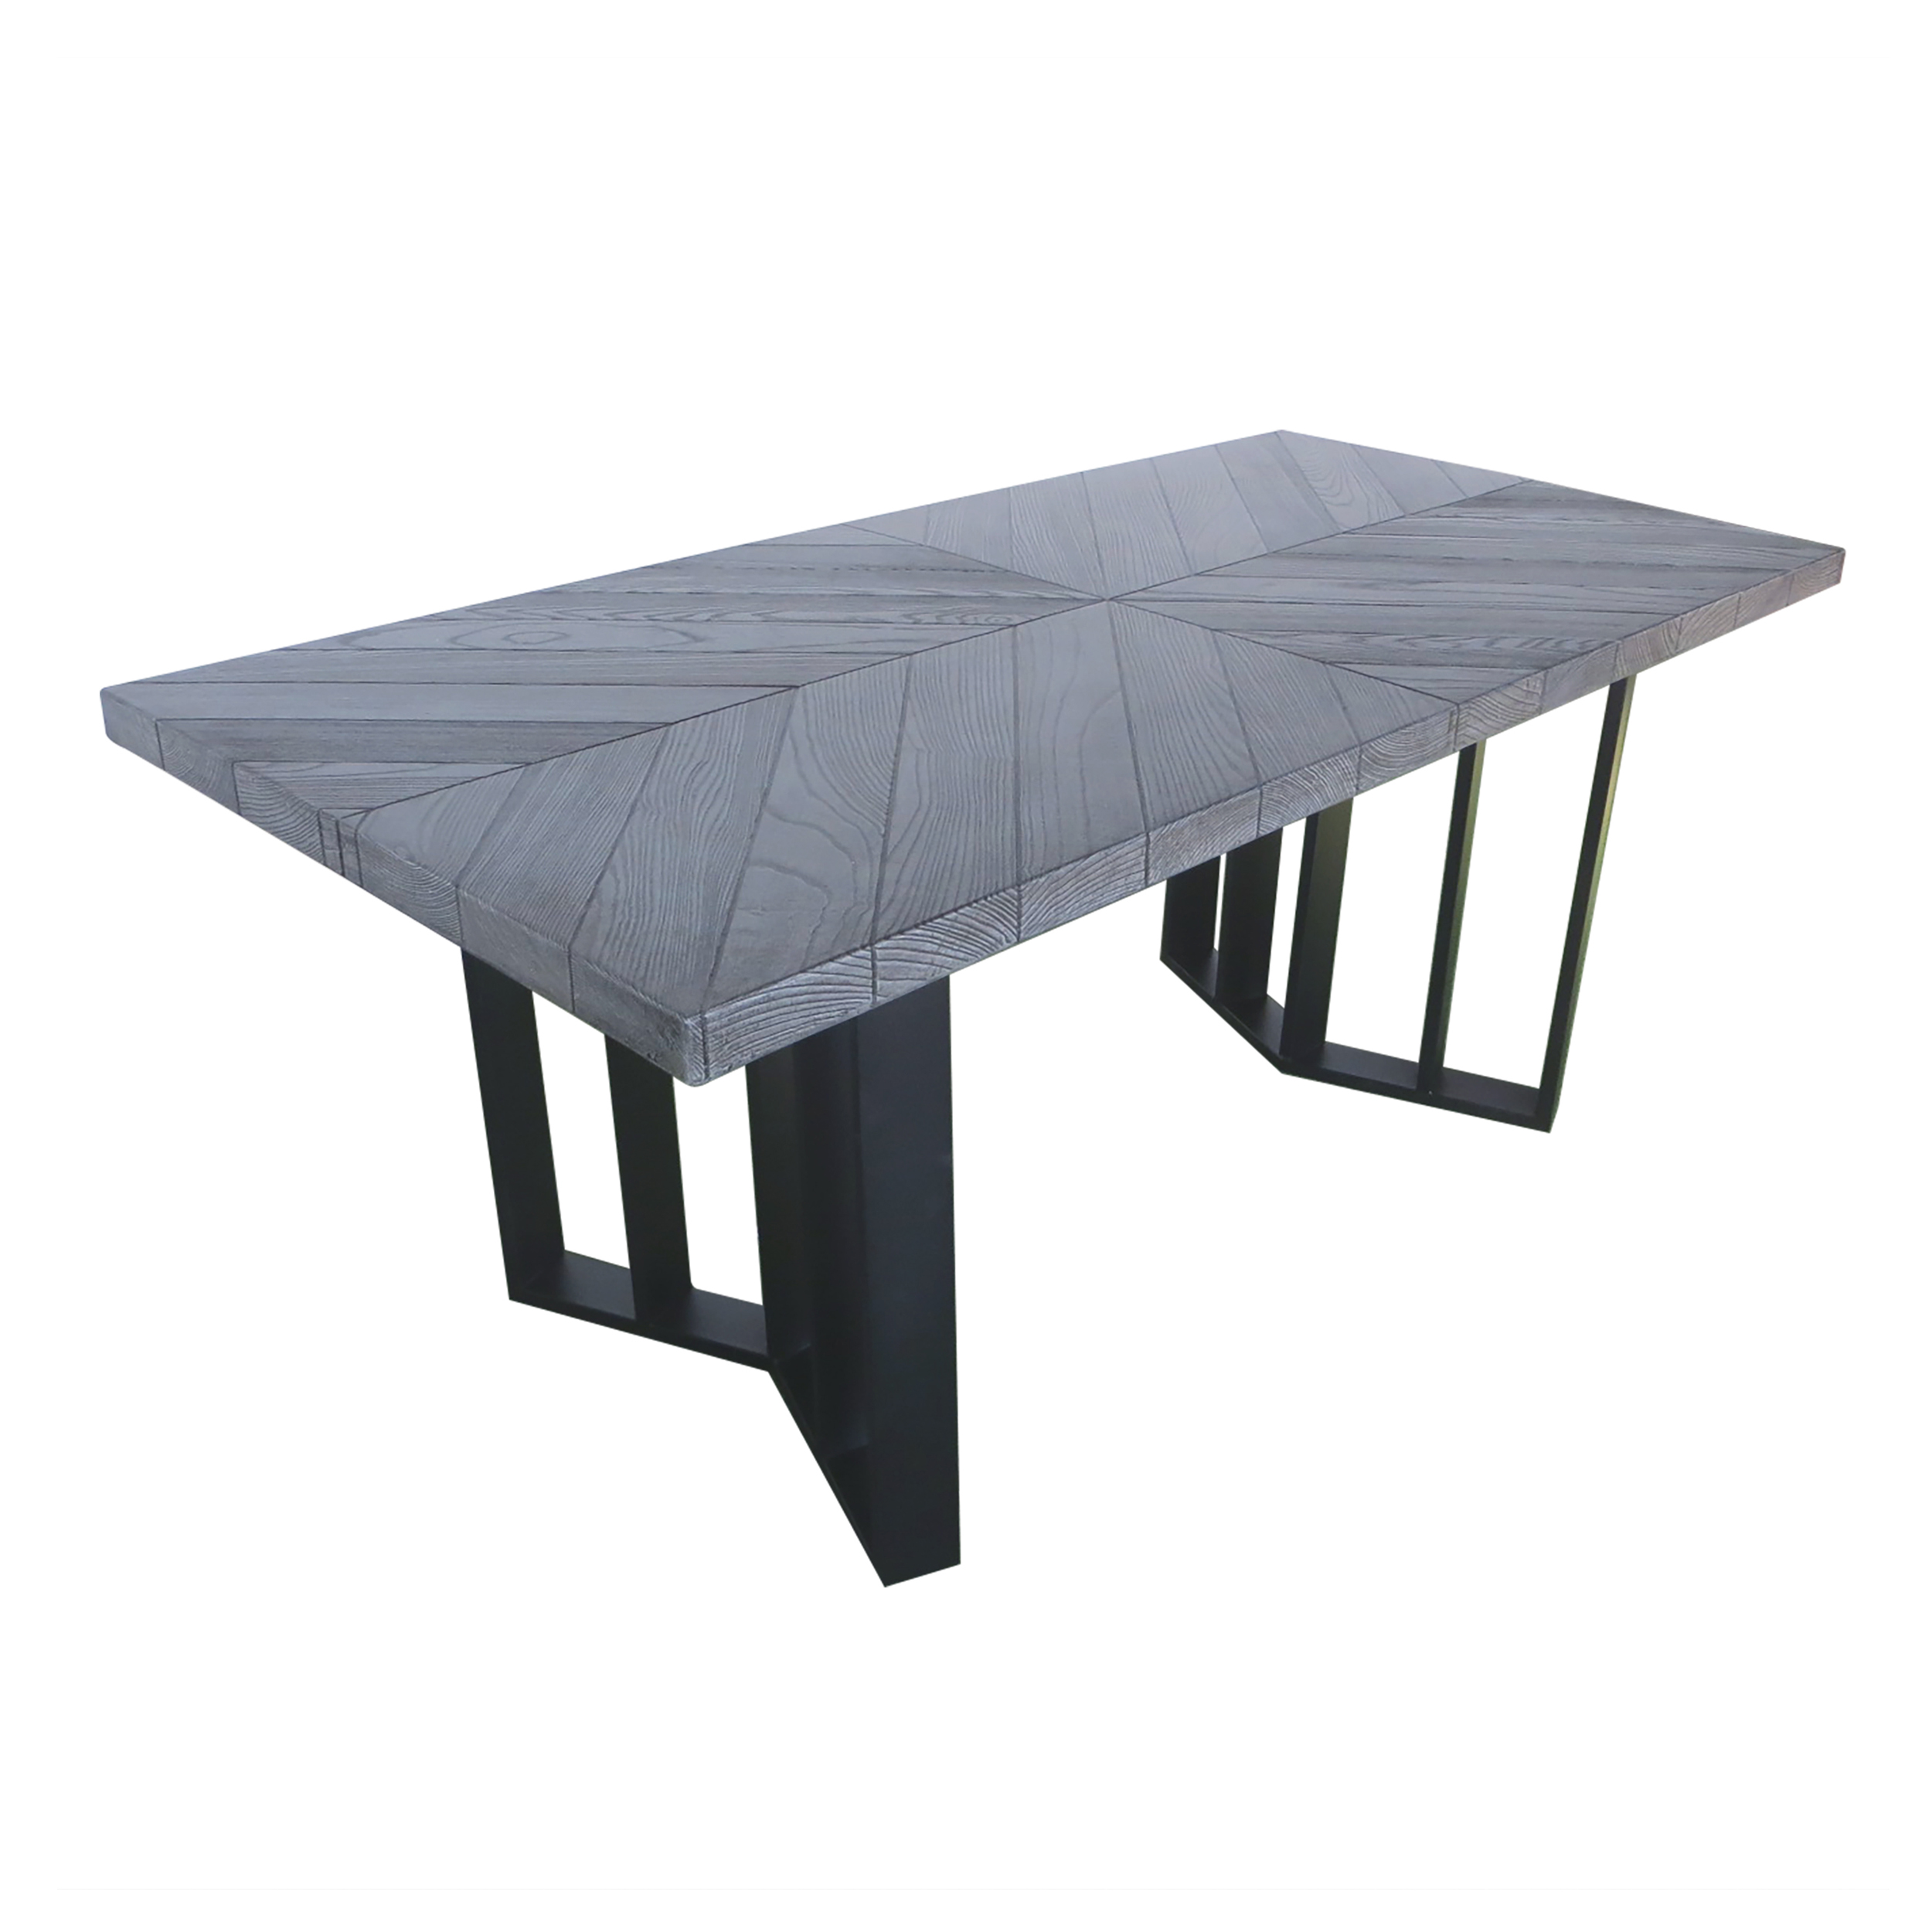 GDF Studio Camden Outdoor Lightweight Concrete Dining Table, Textured Gray Oak and Black - image 1 of 8